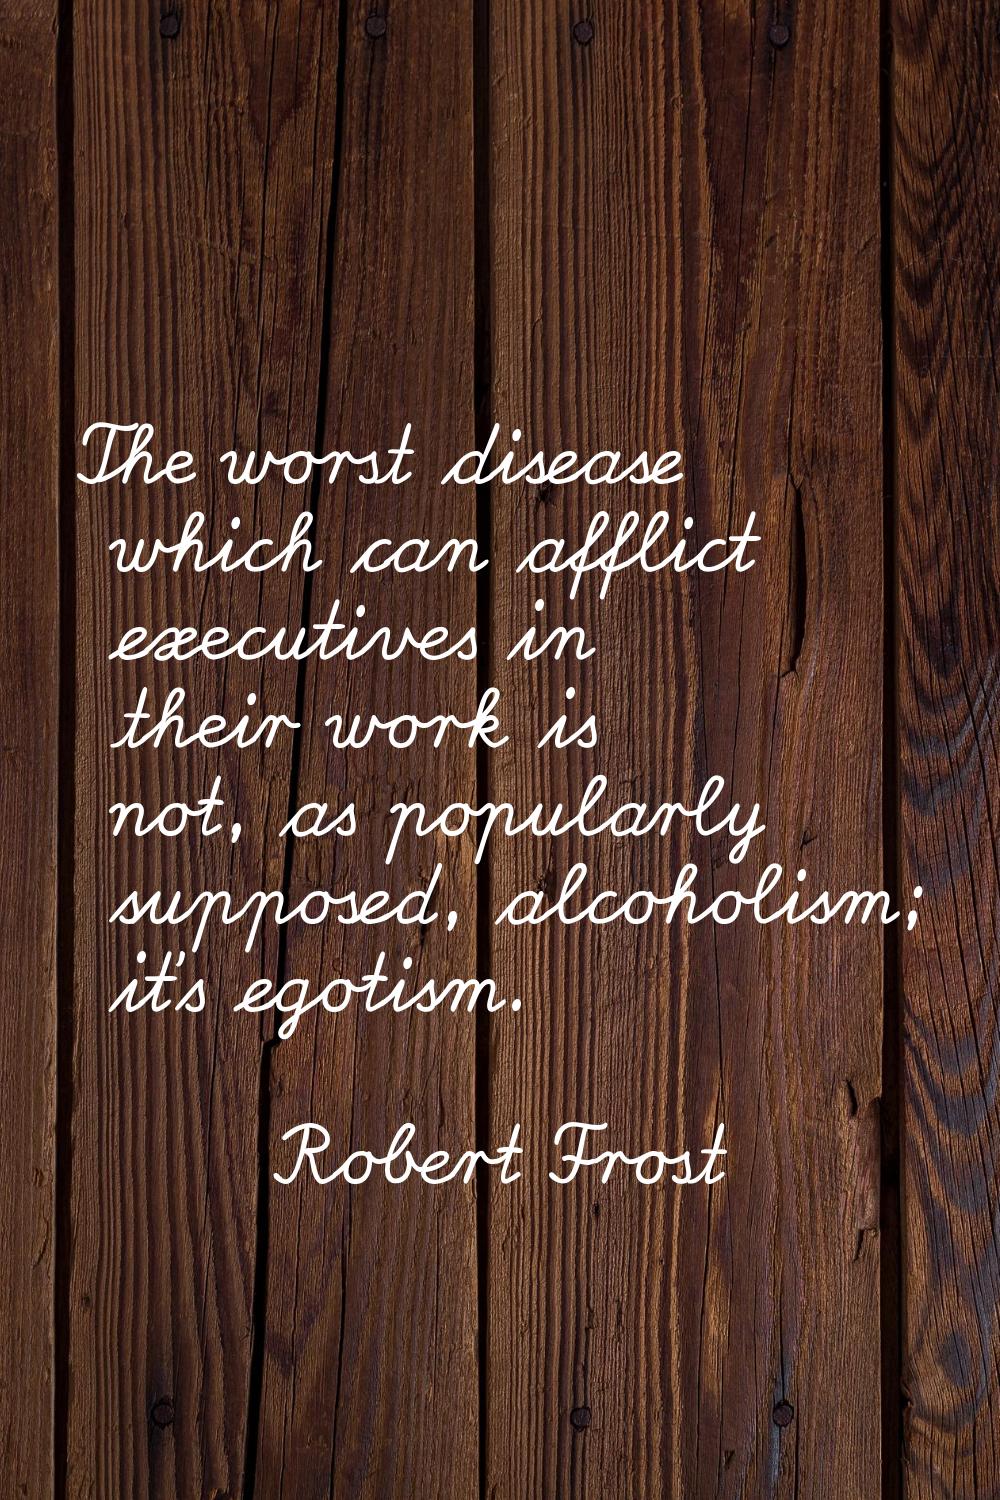 The worst disease which can afflict executives in their work is not, as popularly supposed, alcohol